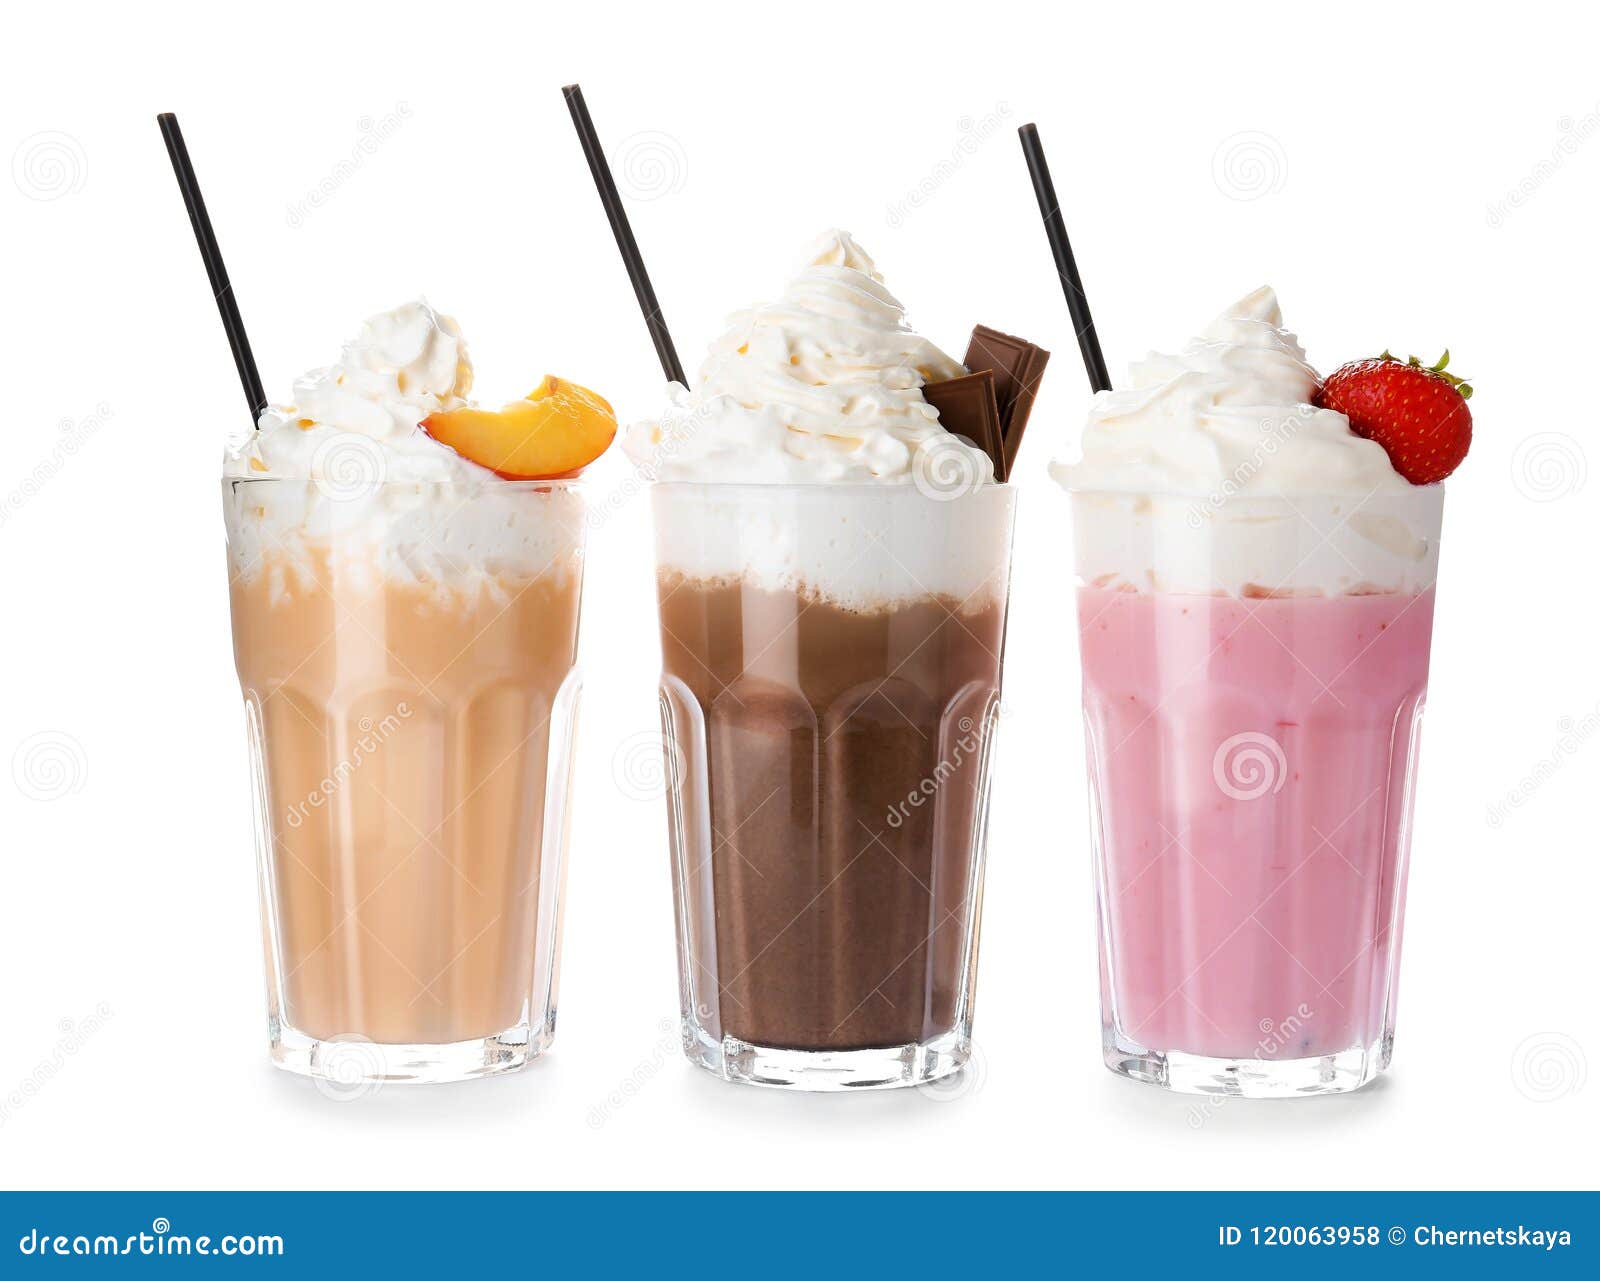 glasses with milk shakes on white background